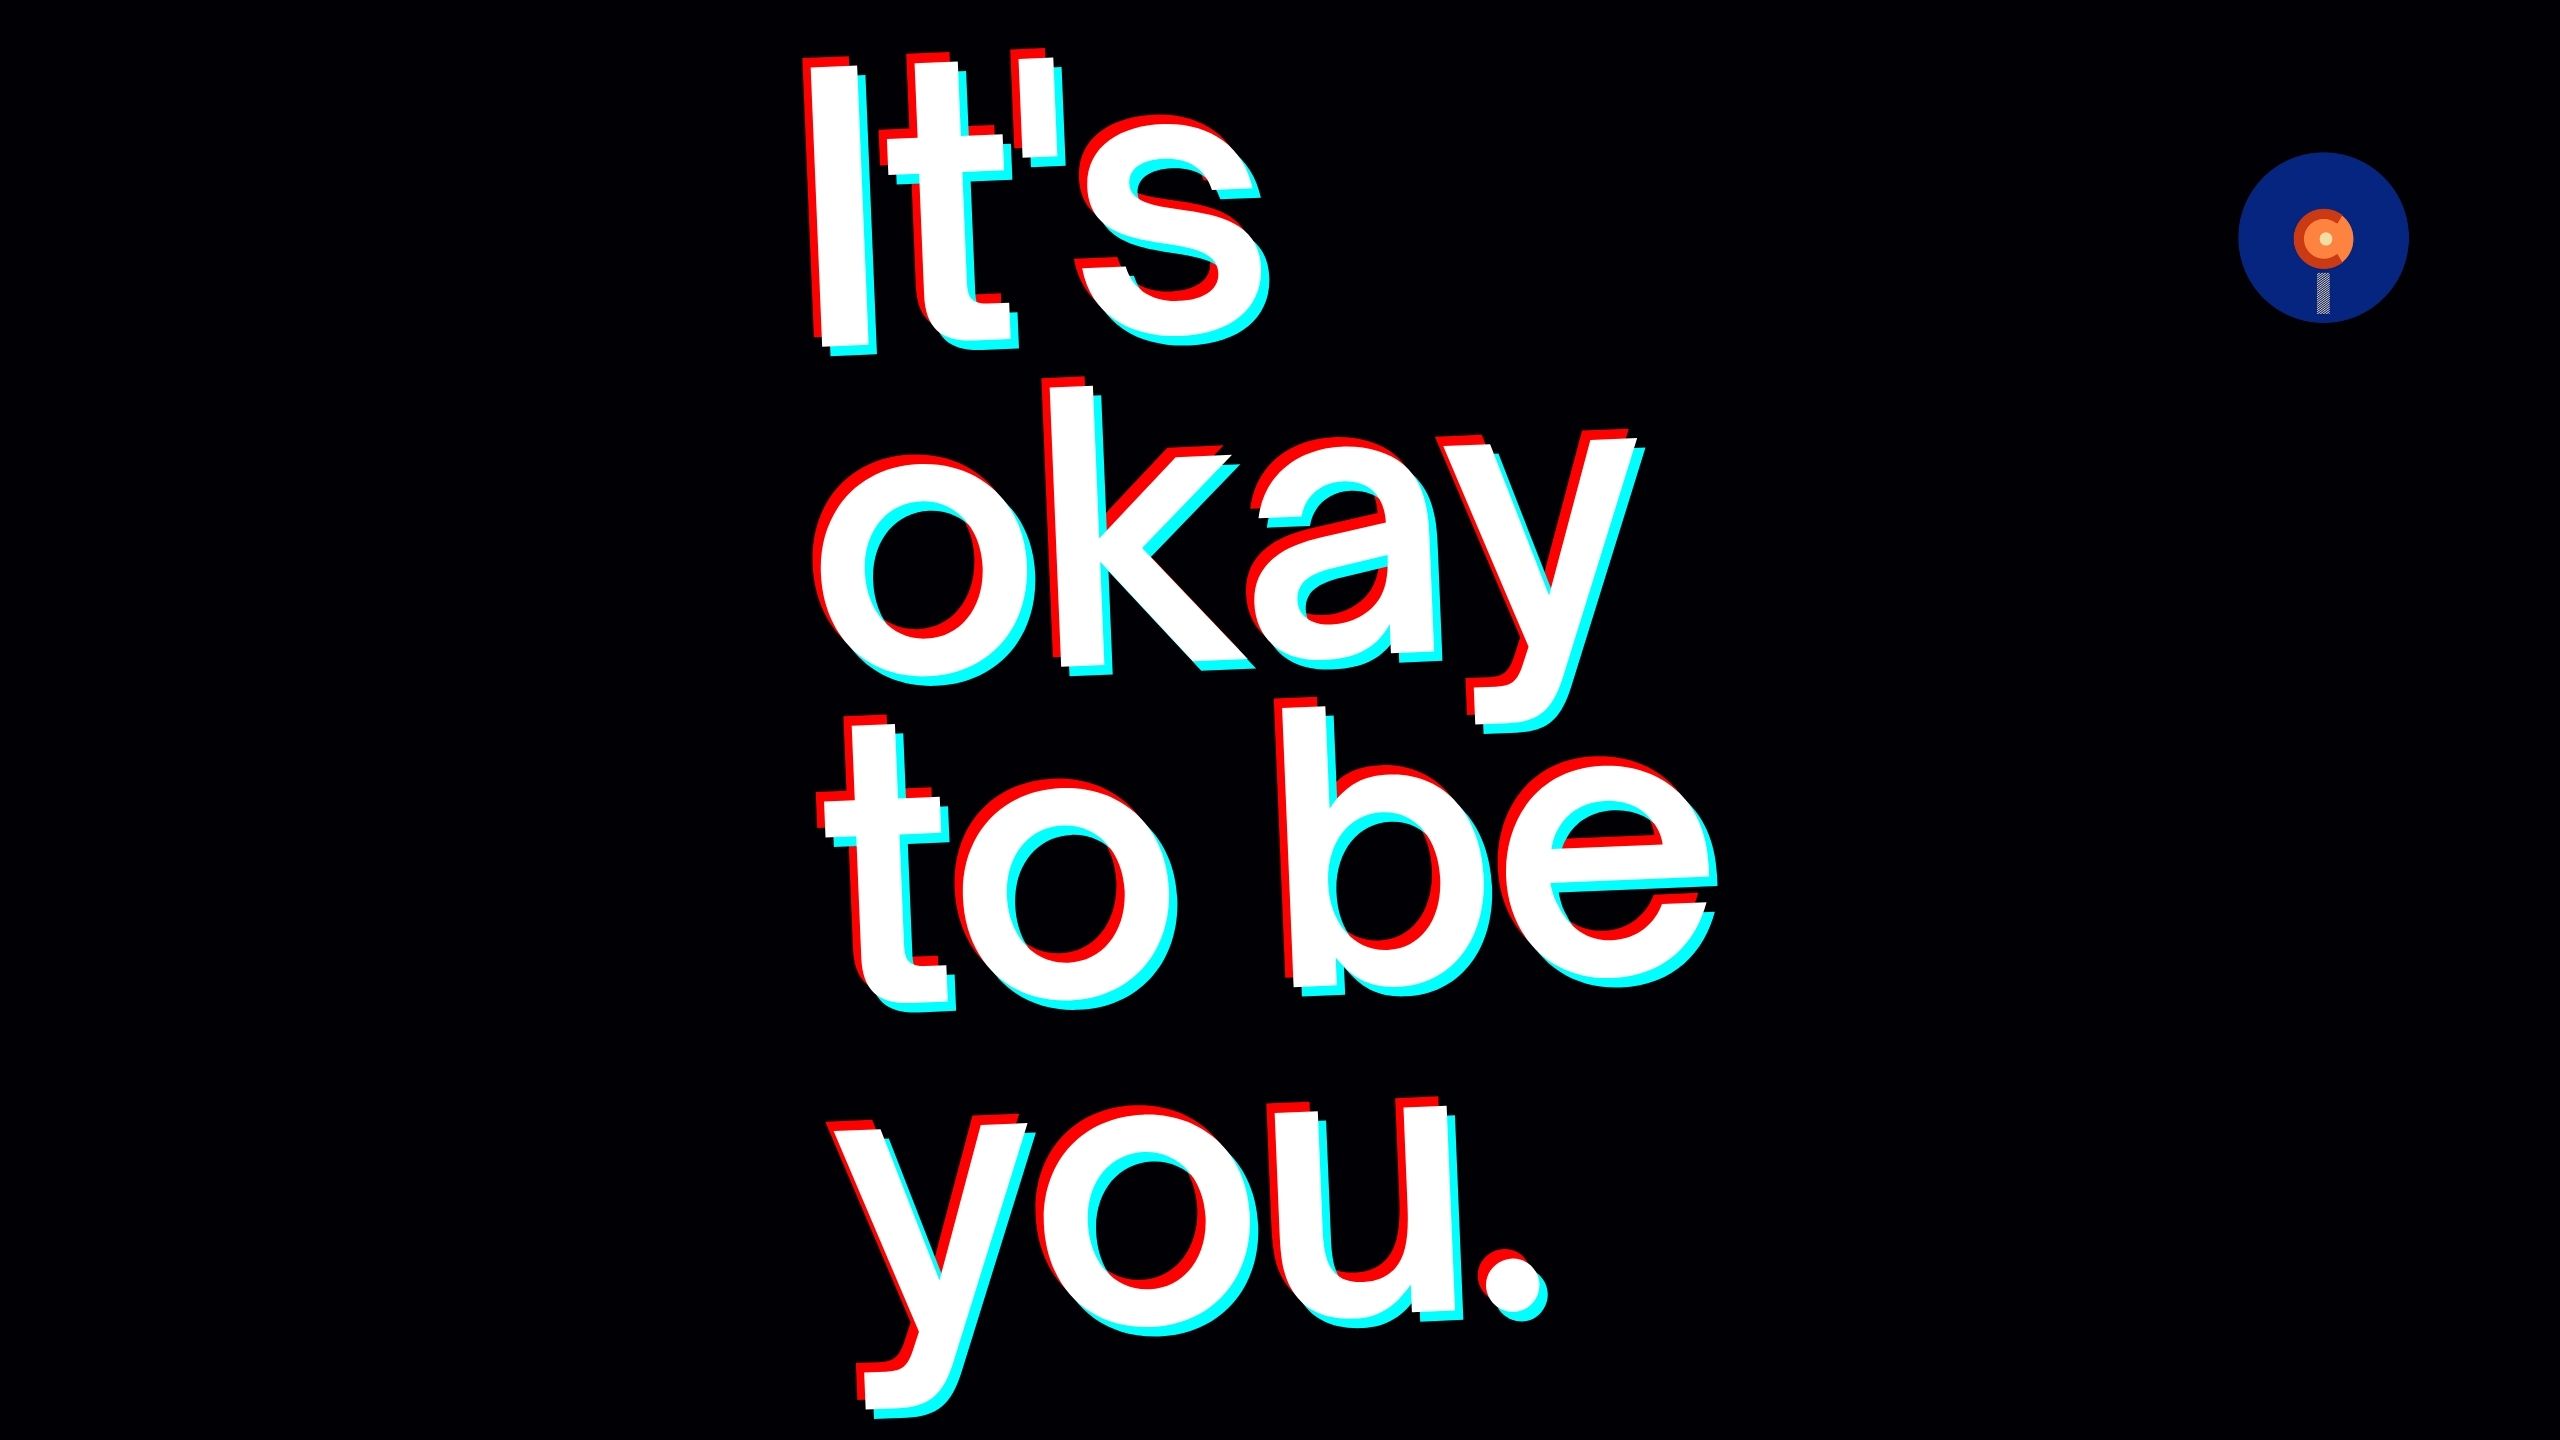 It’s ok to be you